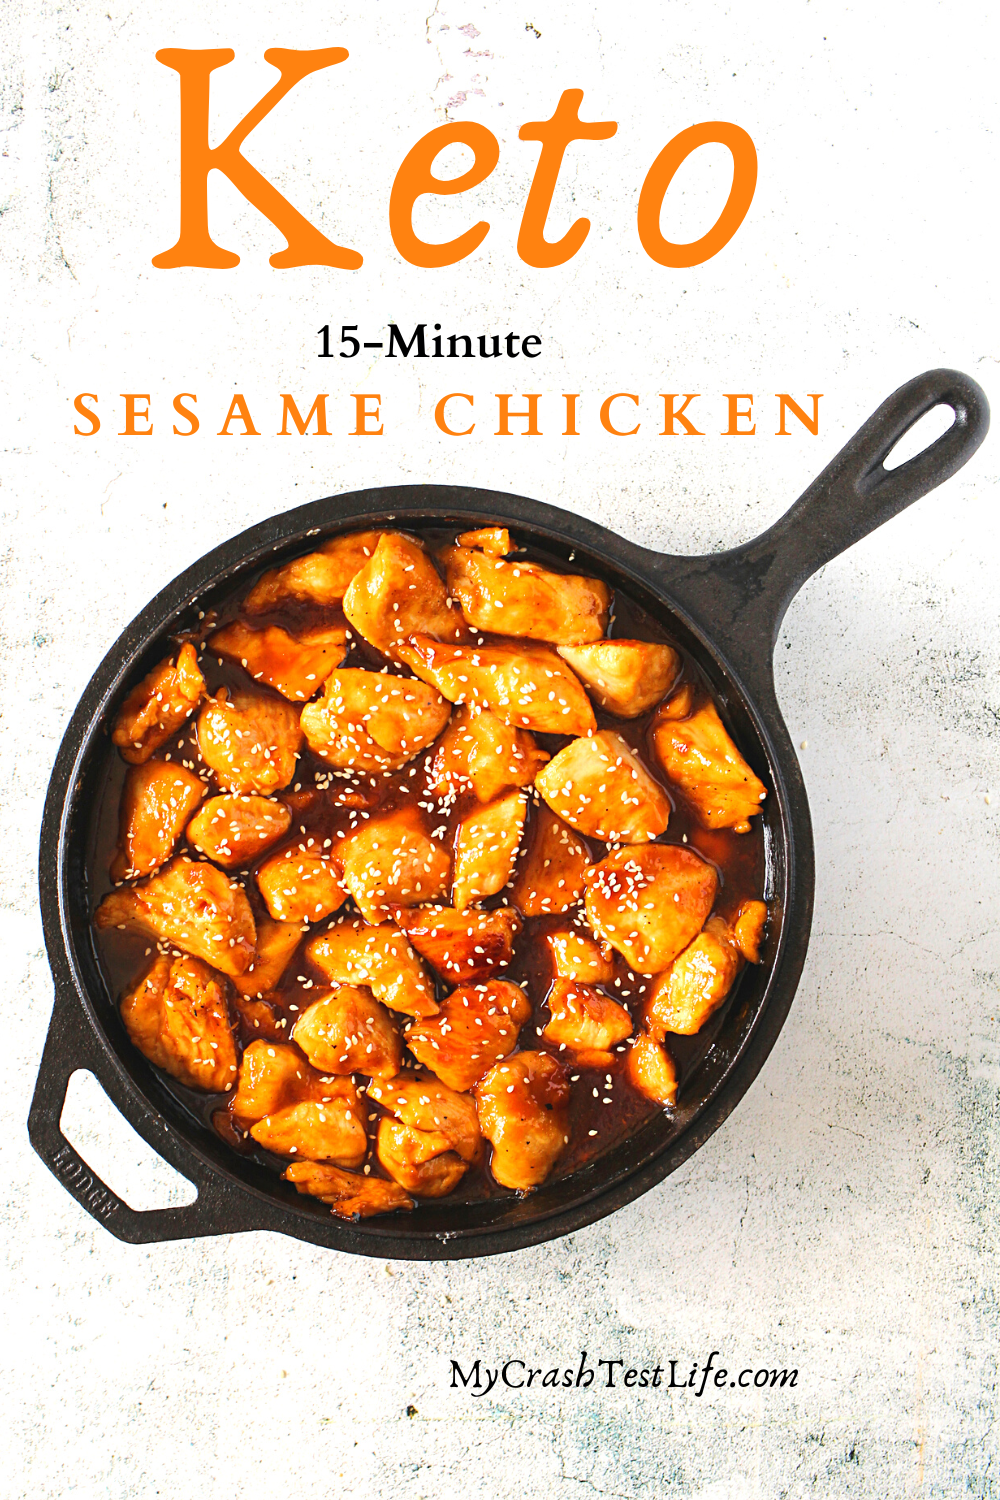 easy keto sesame chicken is made in a skillet in 15 minutes